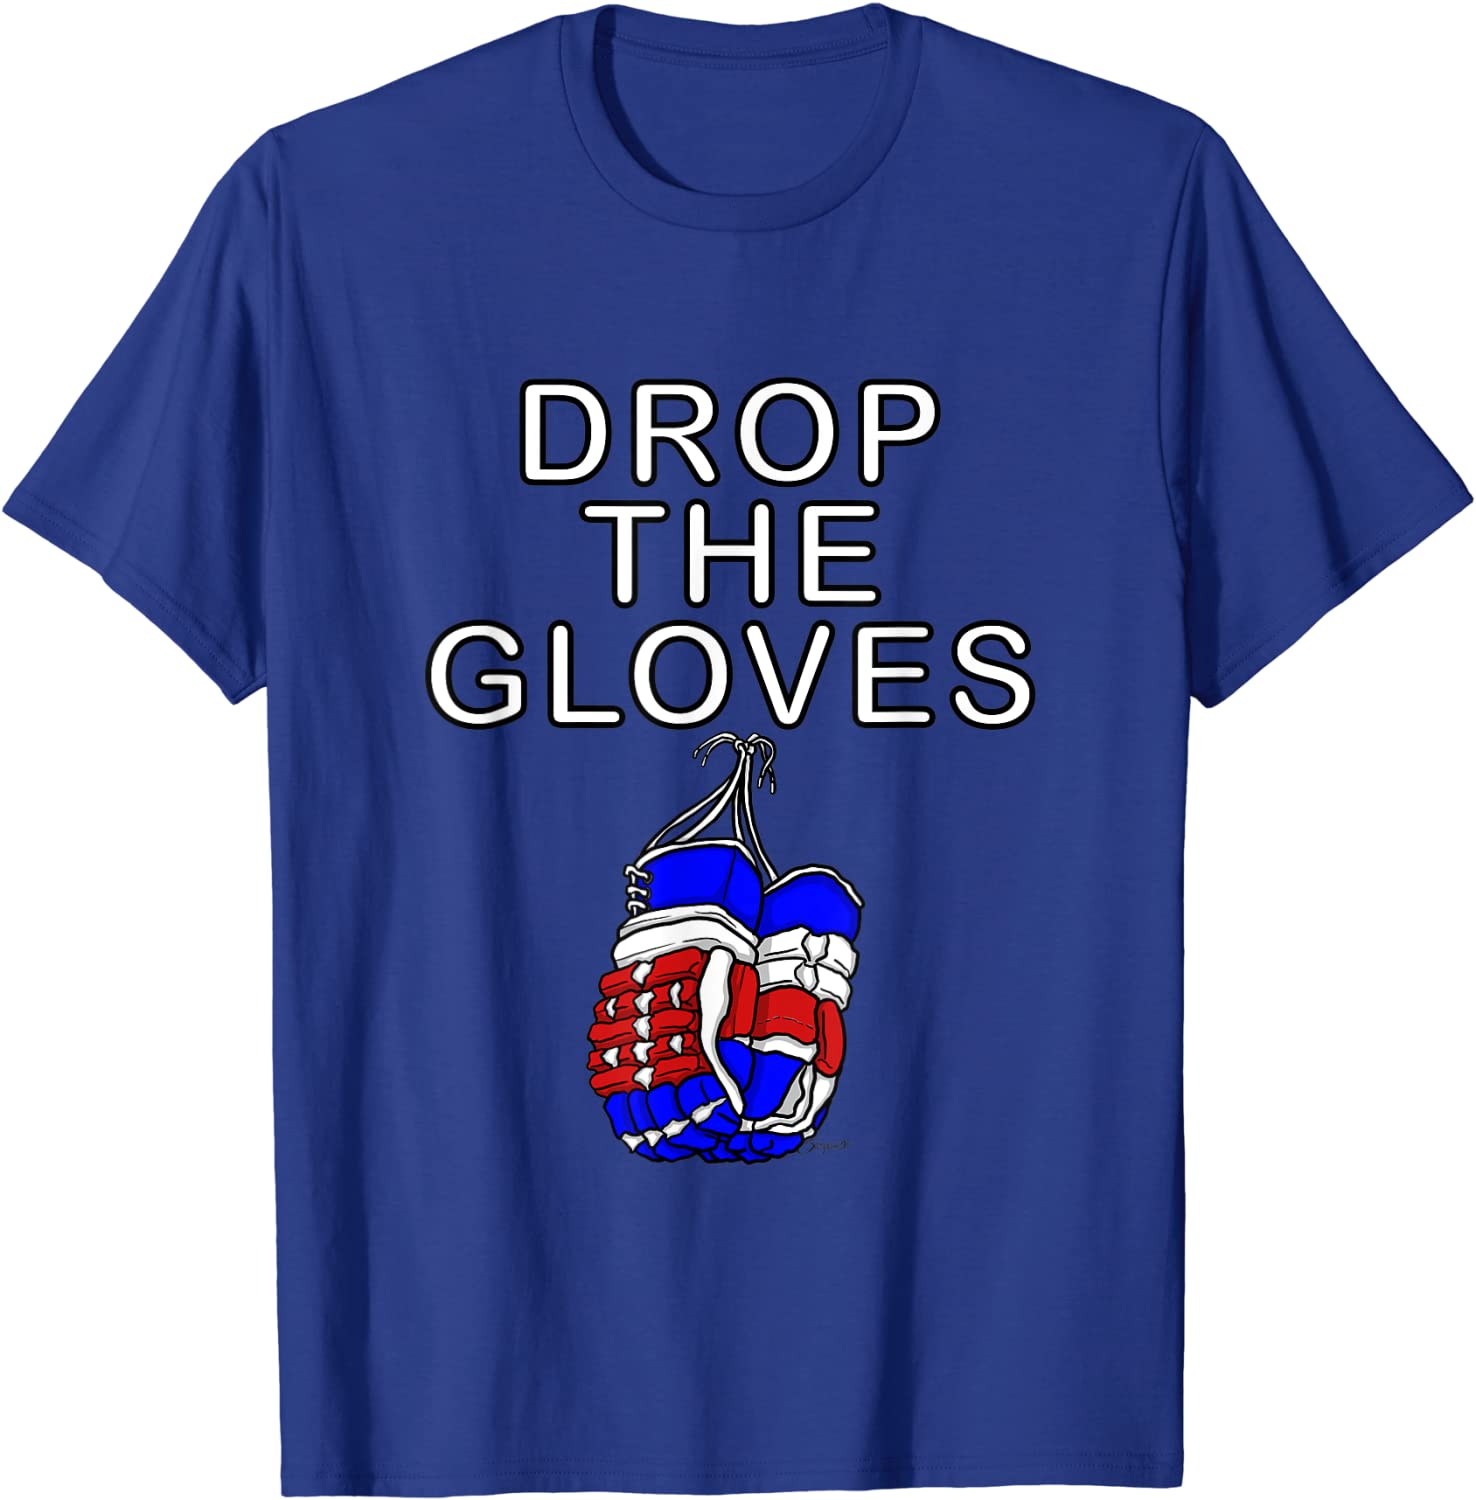 DROP THE GLOVES Ice Hockey Gloves T-Shirt